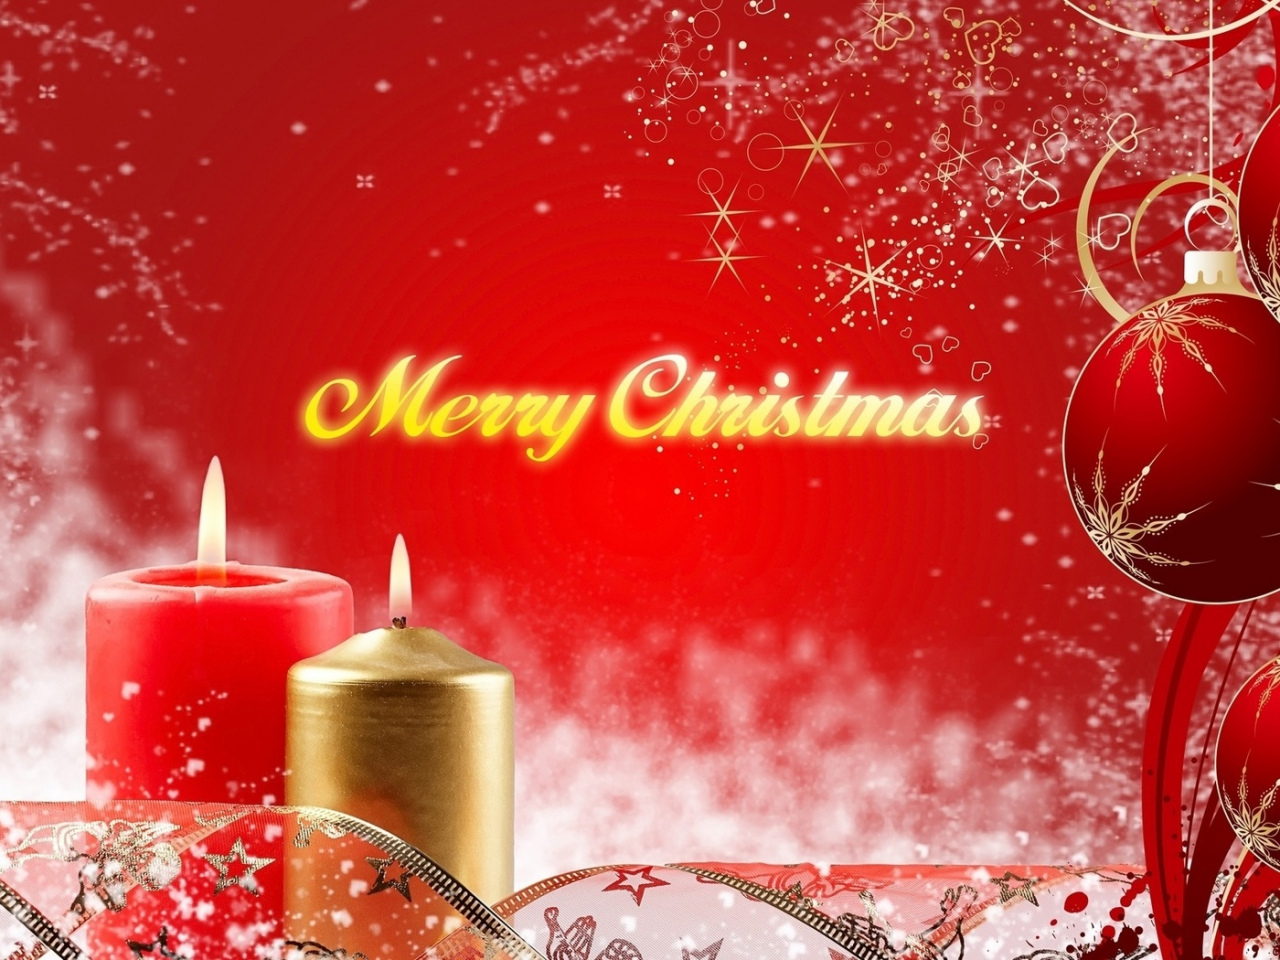 wishes, happines, holliday, merry, christmas